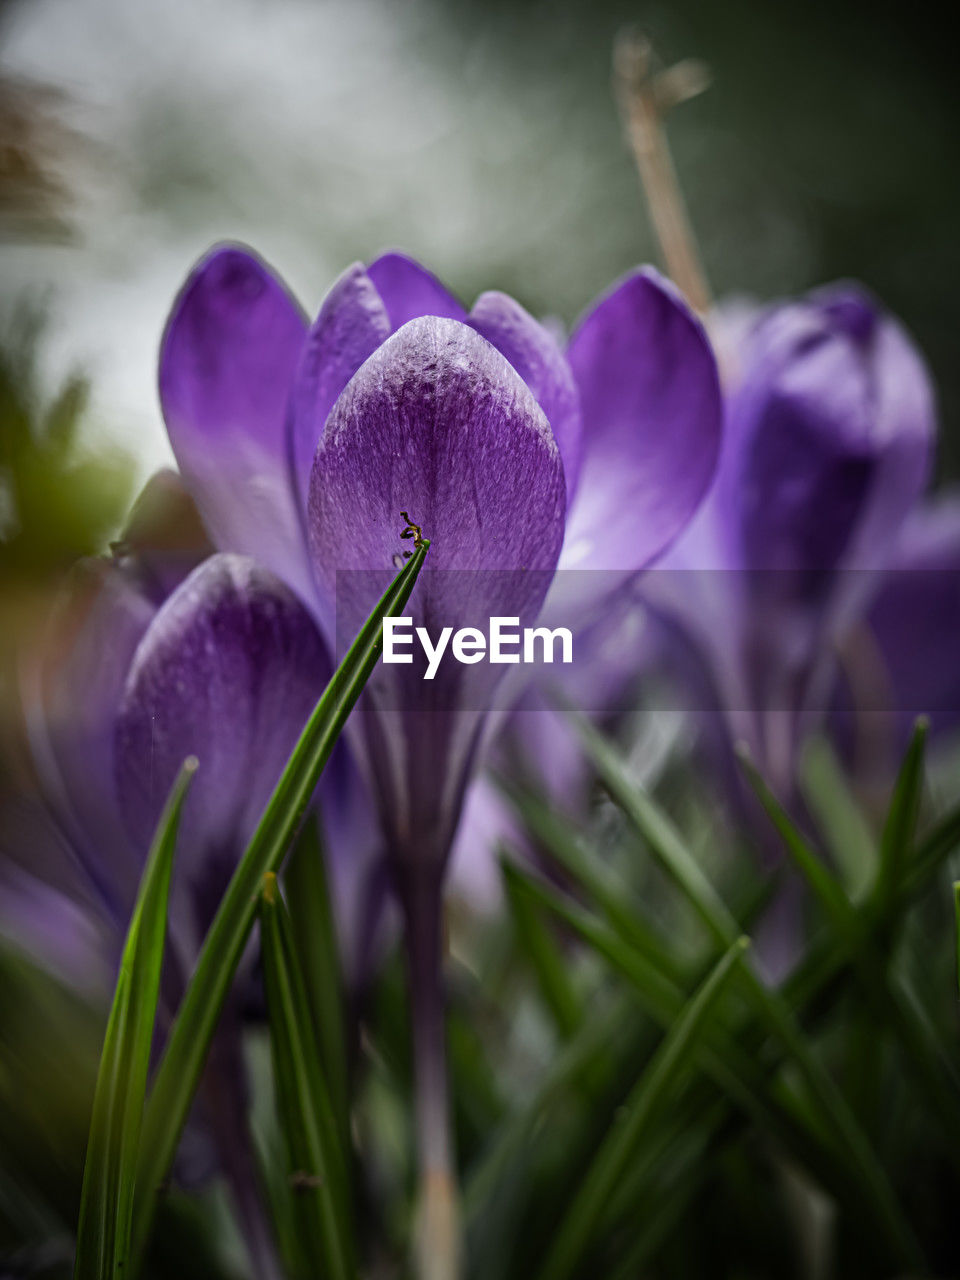 plant, flower, flowering plant, purple, freshness, beauty in nature, close-up, growth, nature, fragility, crocus, macro photography, no people, petal, iris, selective focus, flower head, springtime, inflorescence, blossom, outdoors, focus on foreground, botany, plant stem, vegetable